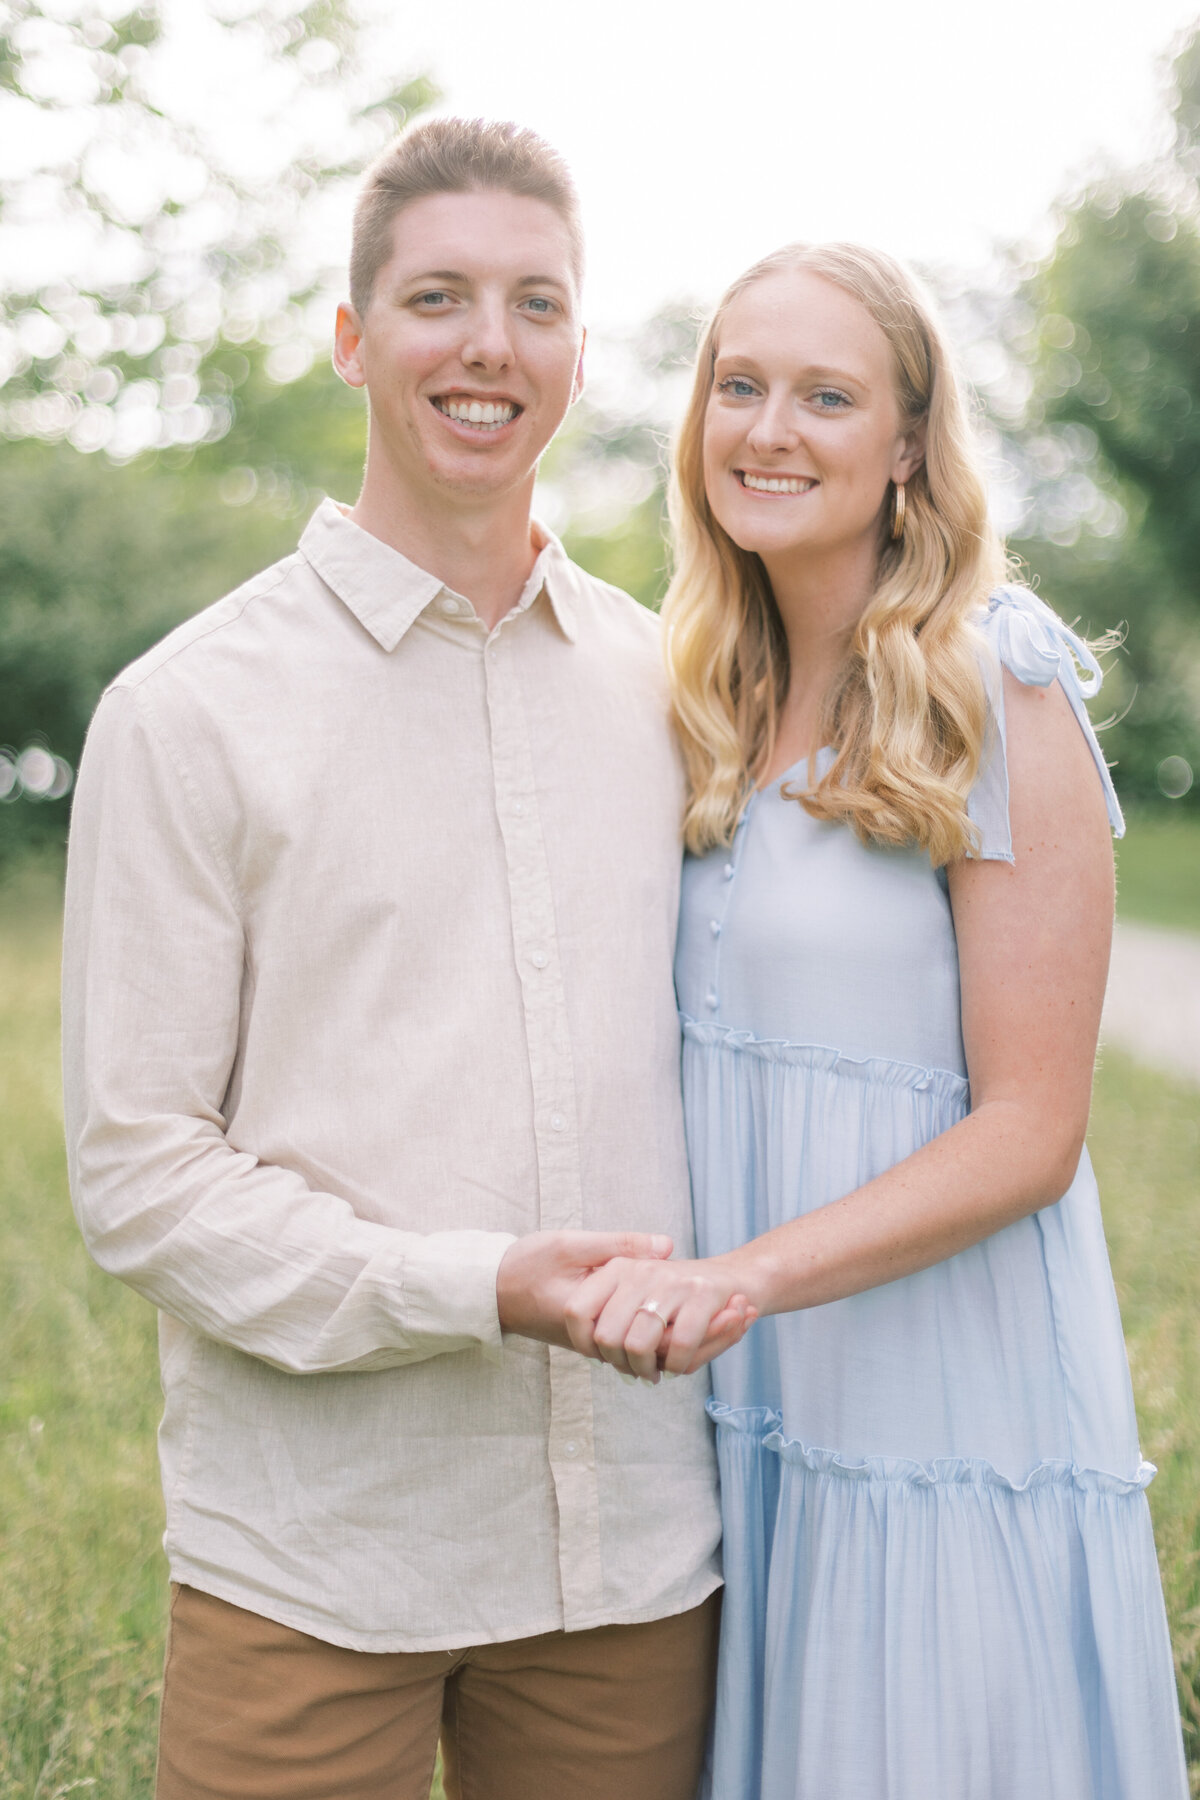 amber-rhea-photography-midwest-wedding-photographer-stl-engagement210A4802